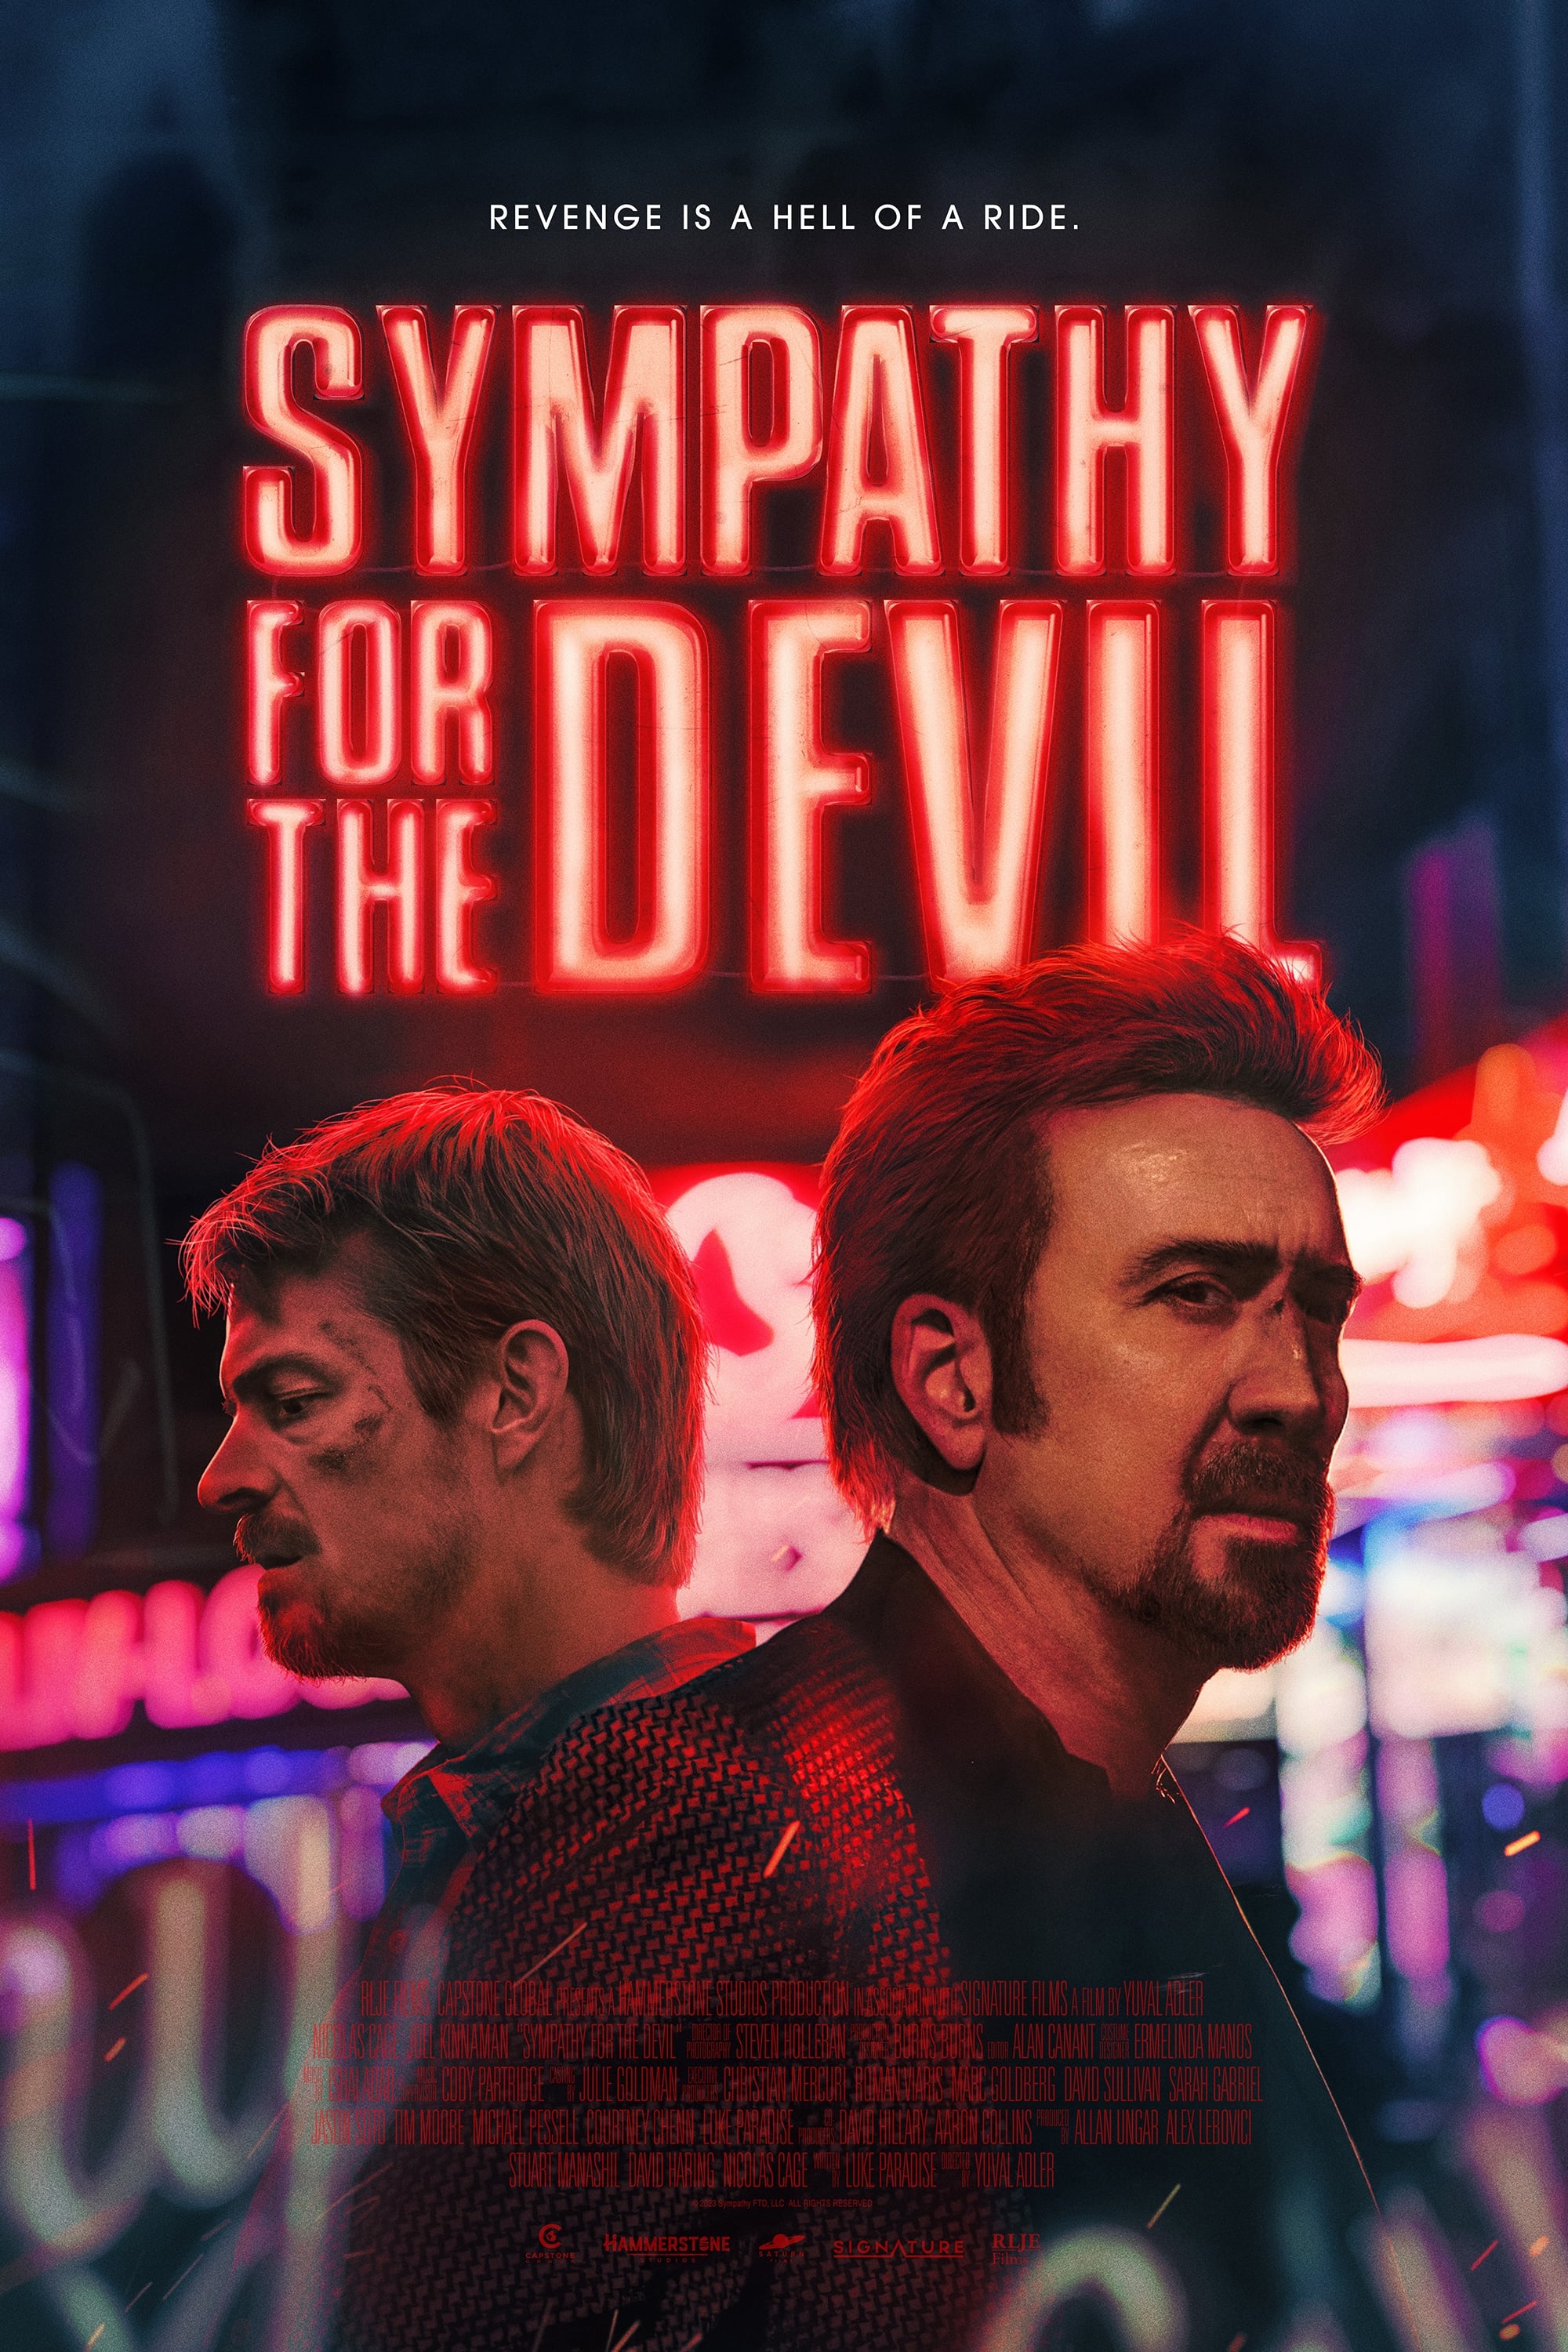 [WATCH 72+] Sympathy for the Devil (2023) FULL MOVIE ONLINE FREE ENGLISH/Dub/SUB Thriller STREAMINGS ������ Movie Poster